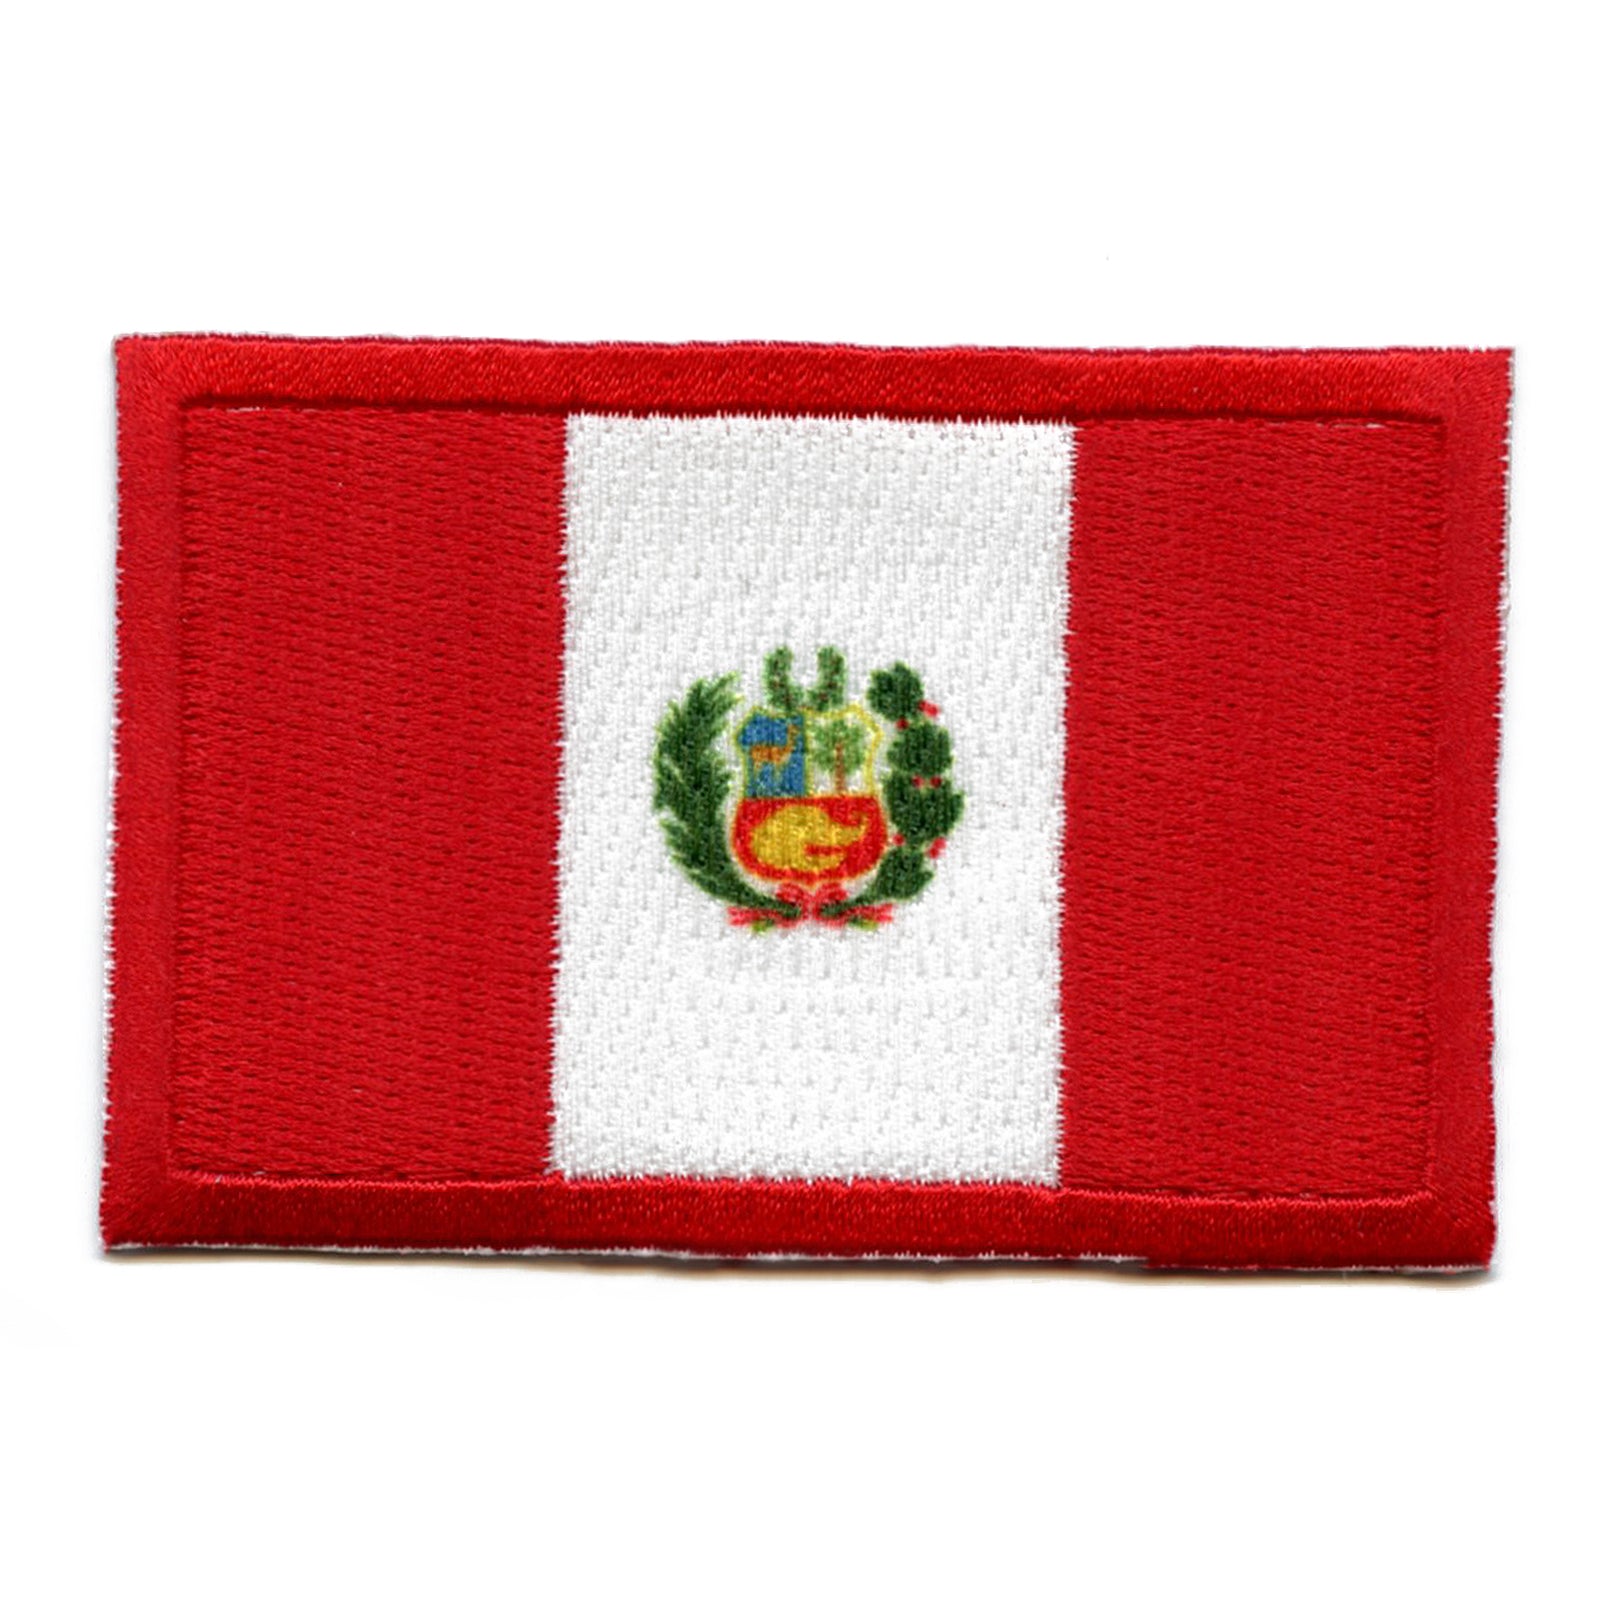 Peru Country Flag Sublimated Embroidery Iron On Patch 